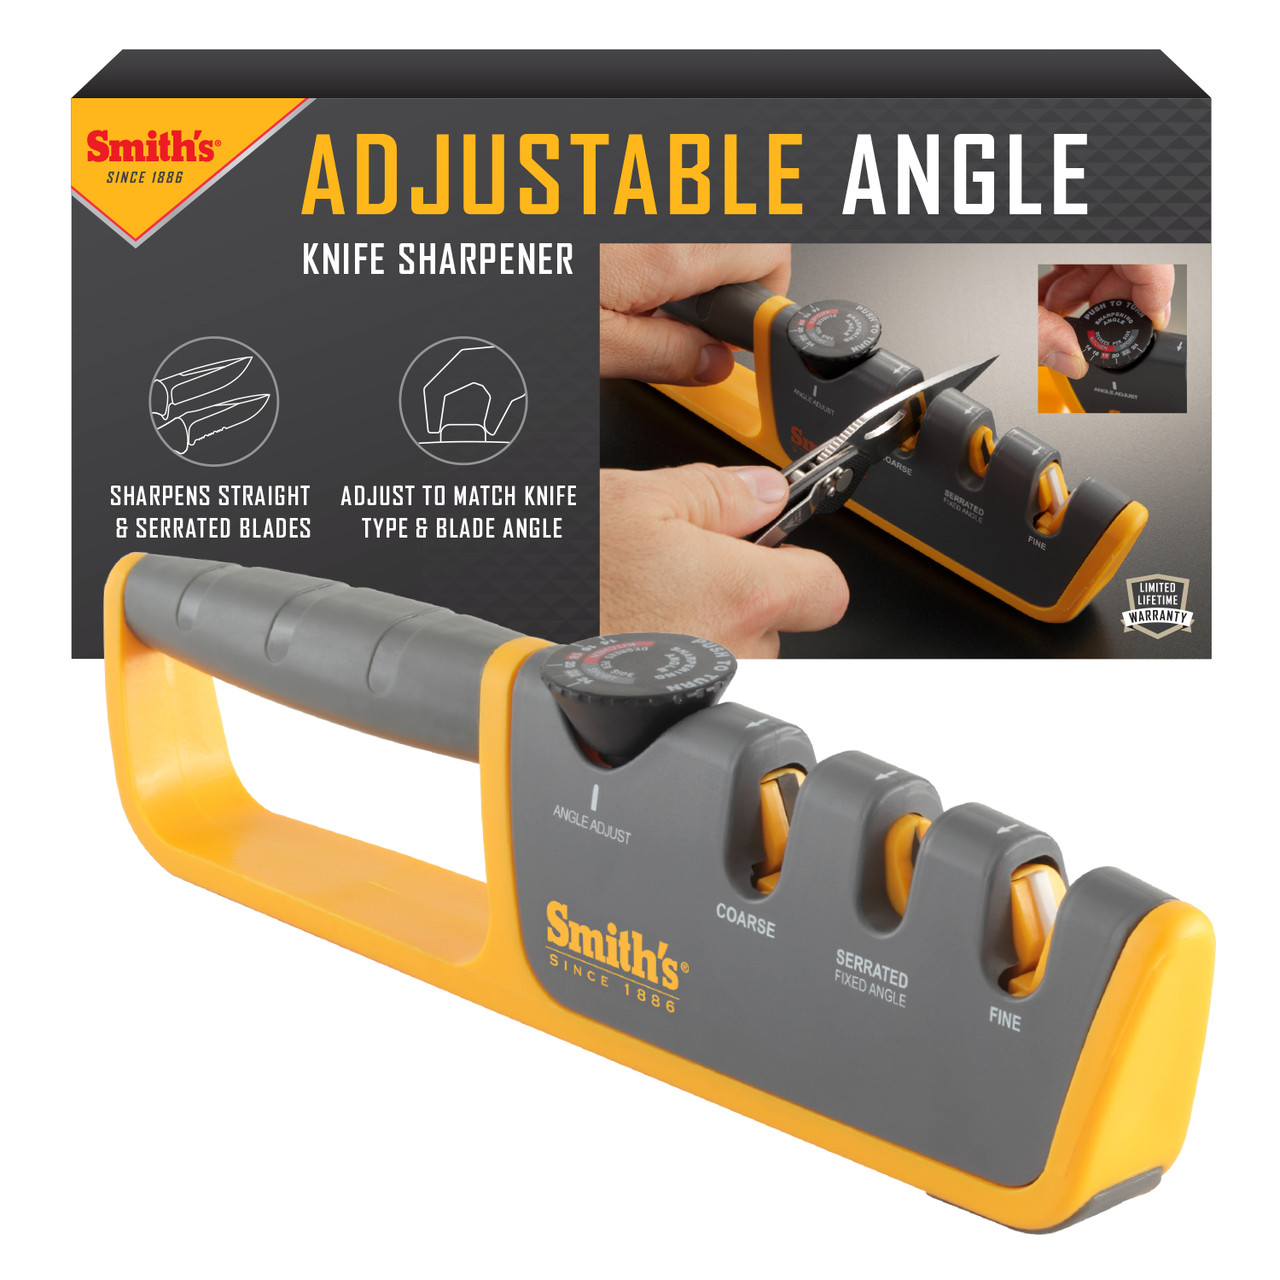 Adjustable Angle Pull-Thru Knife Sharpener - Smith's Consumer Products